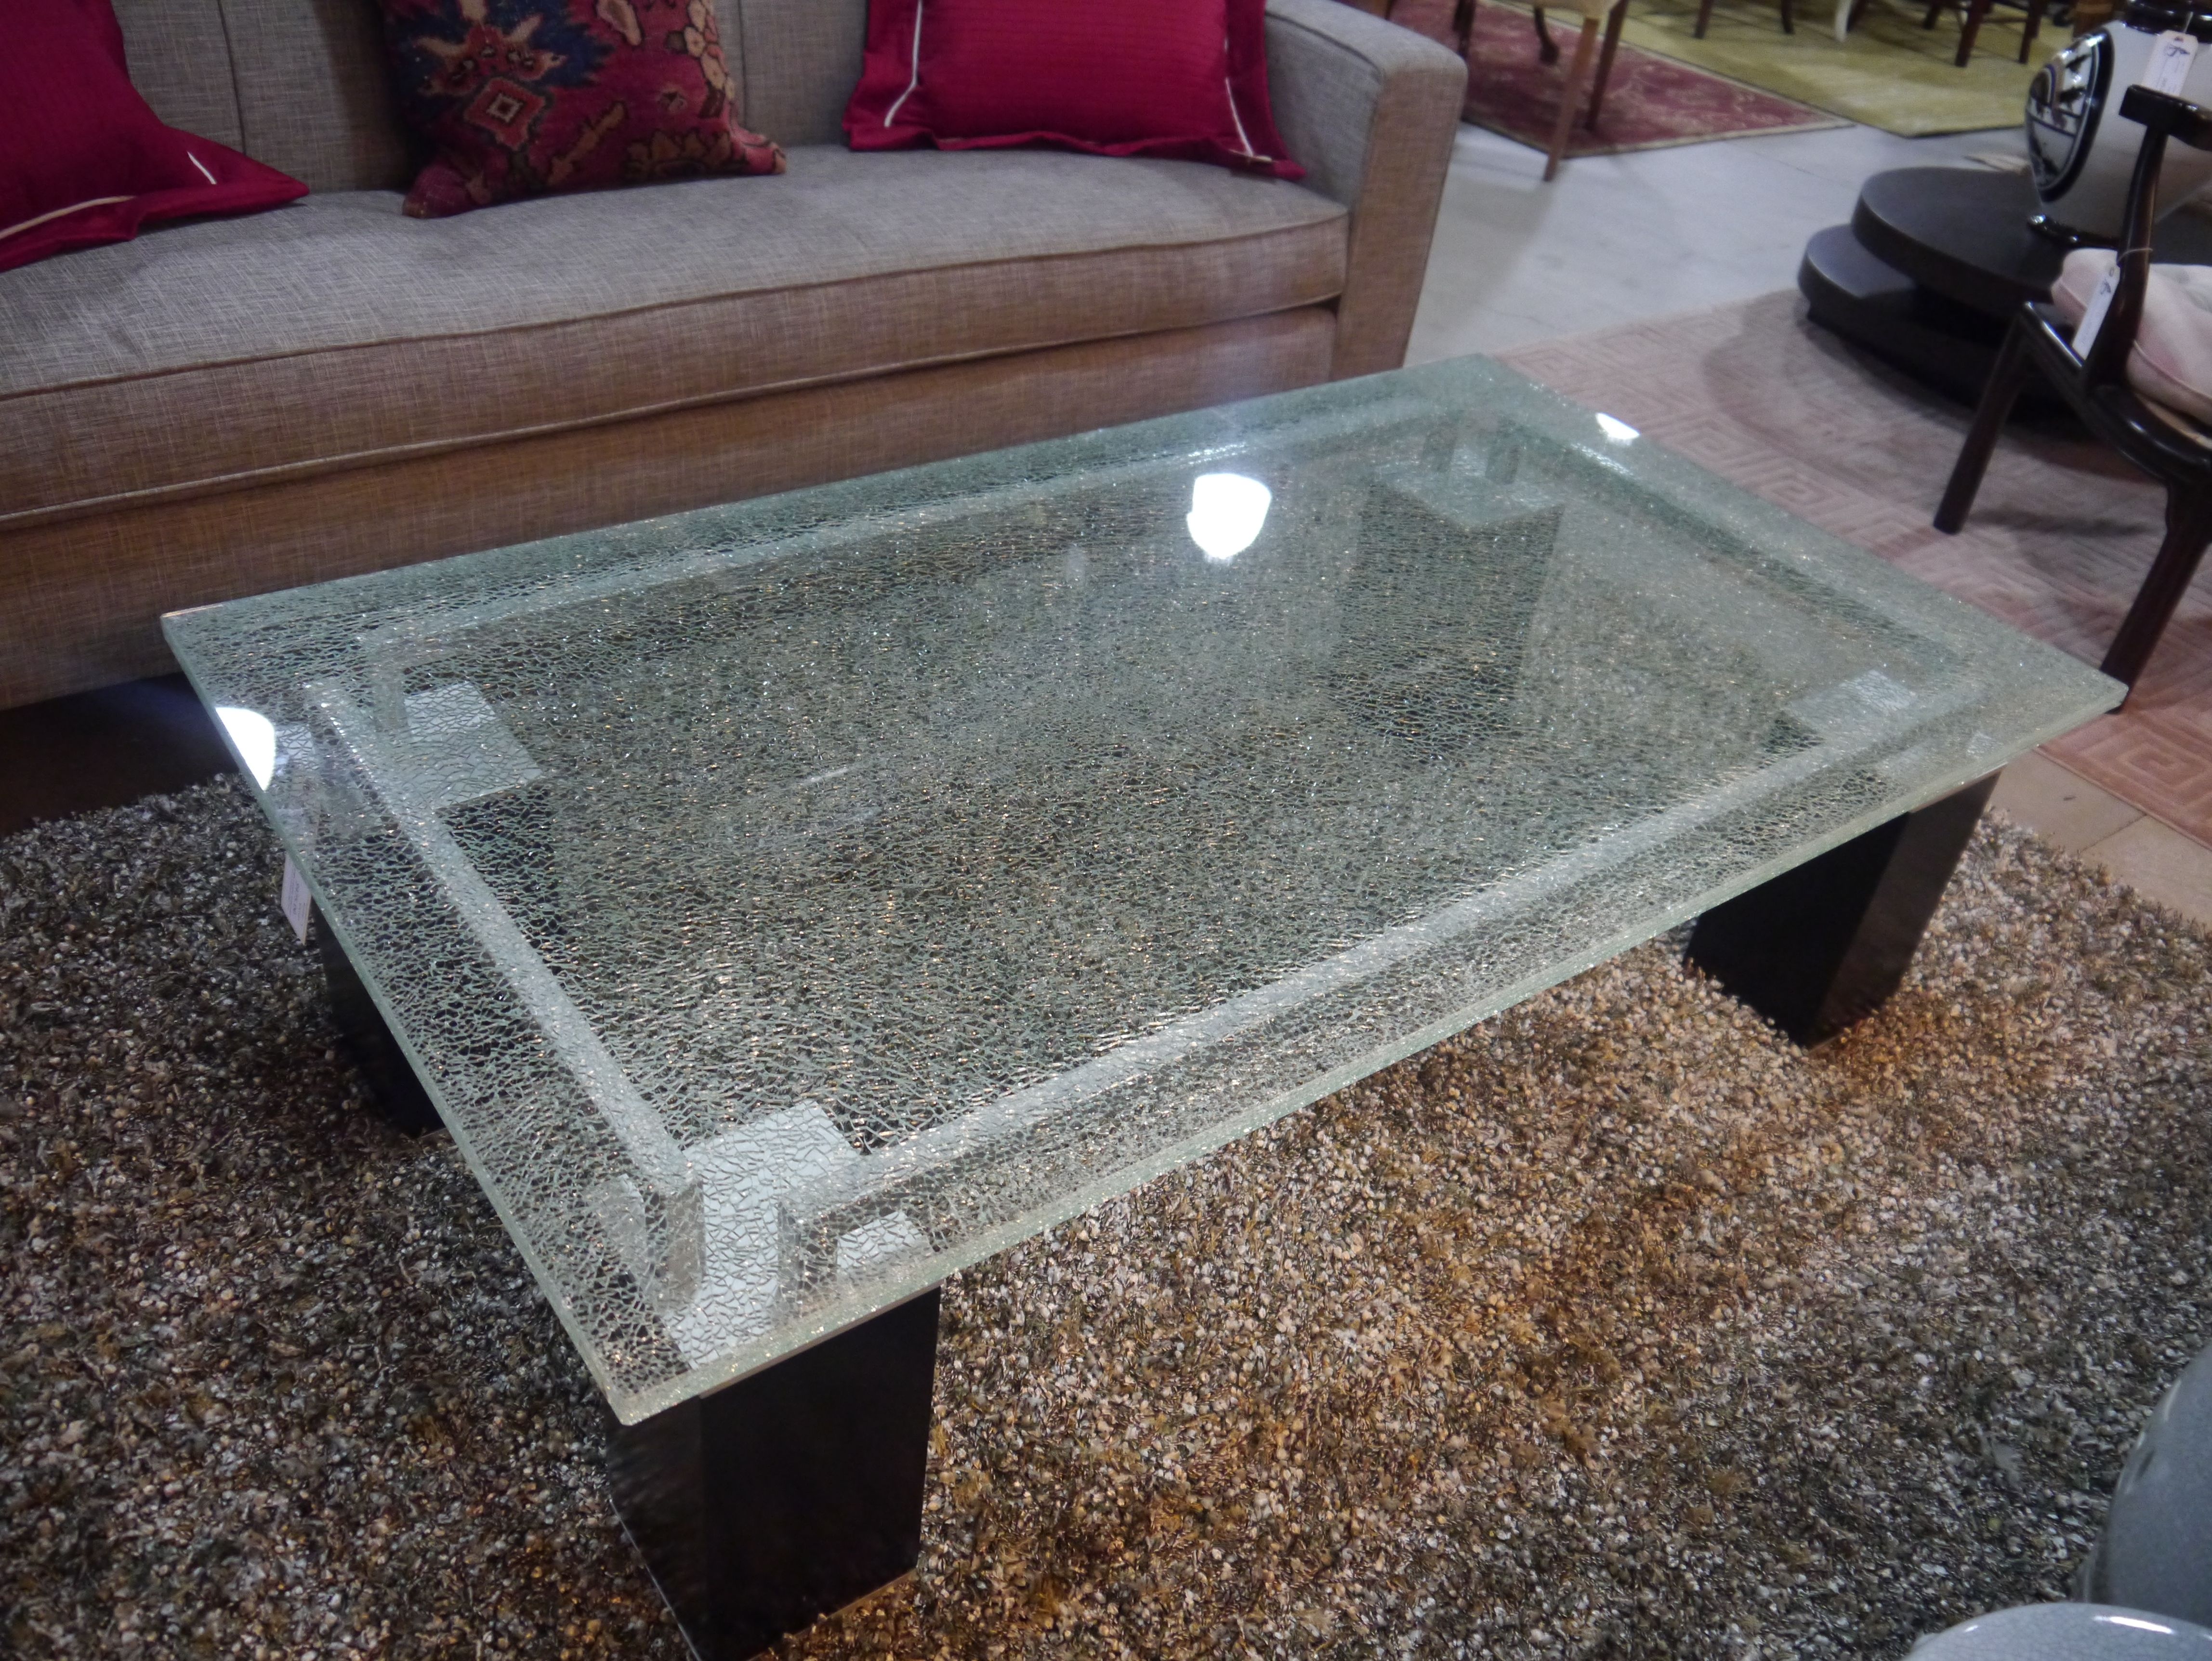 Custom Glass Coffee Table Seams To Fit Home Consignment Furniture Designer Showroom Portland (View 7 of 9)